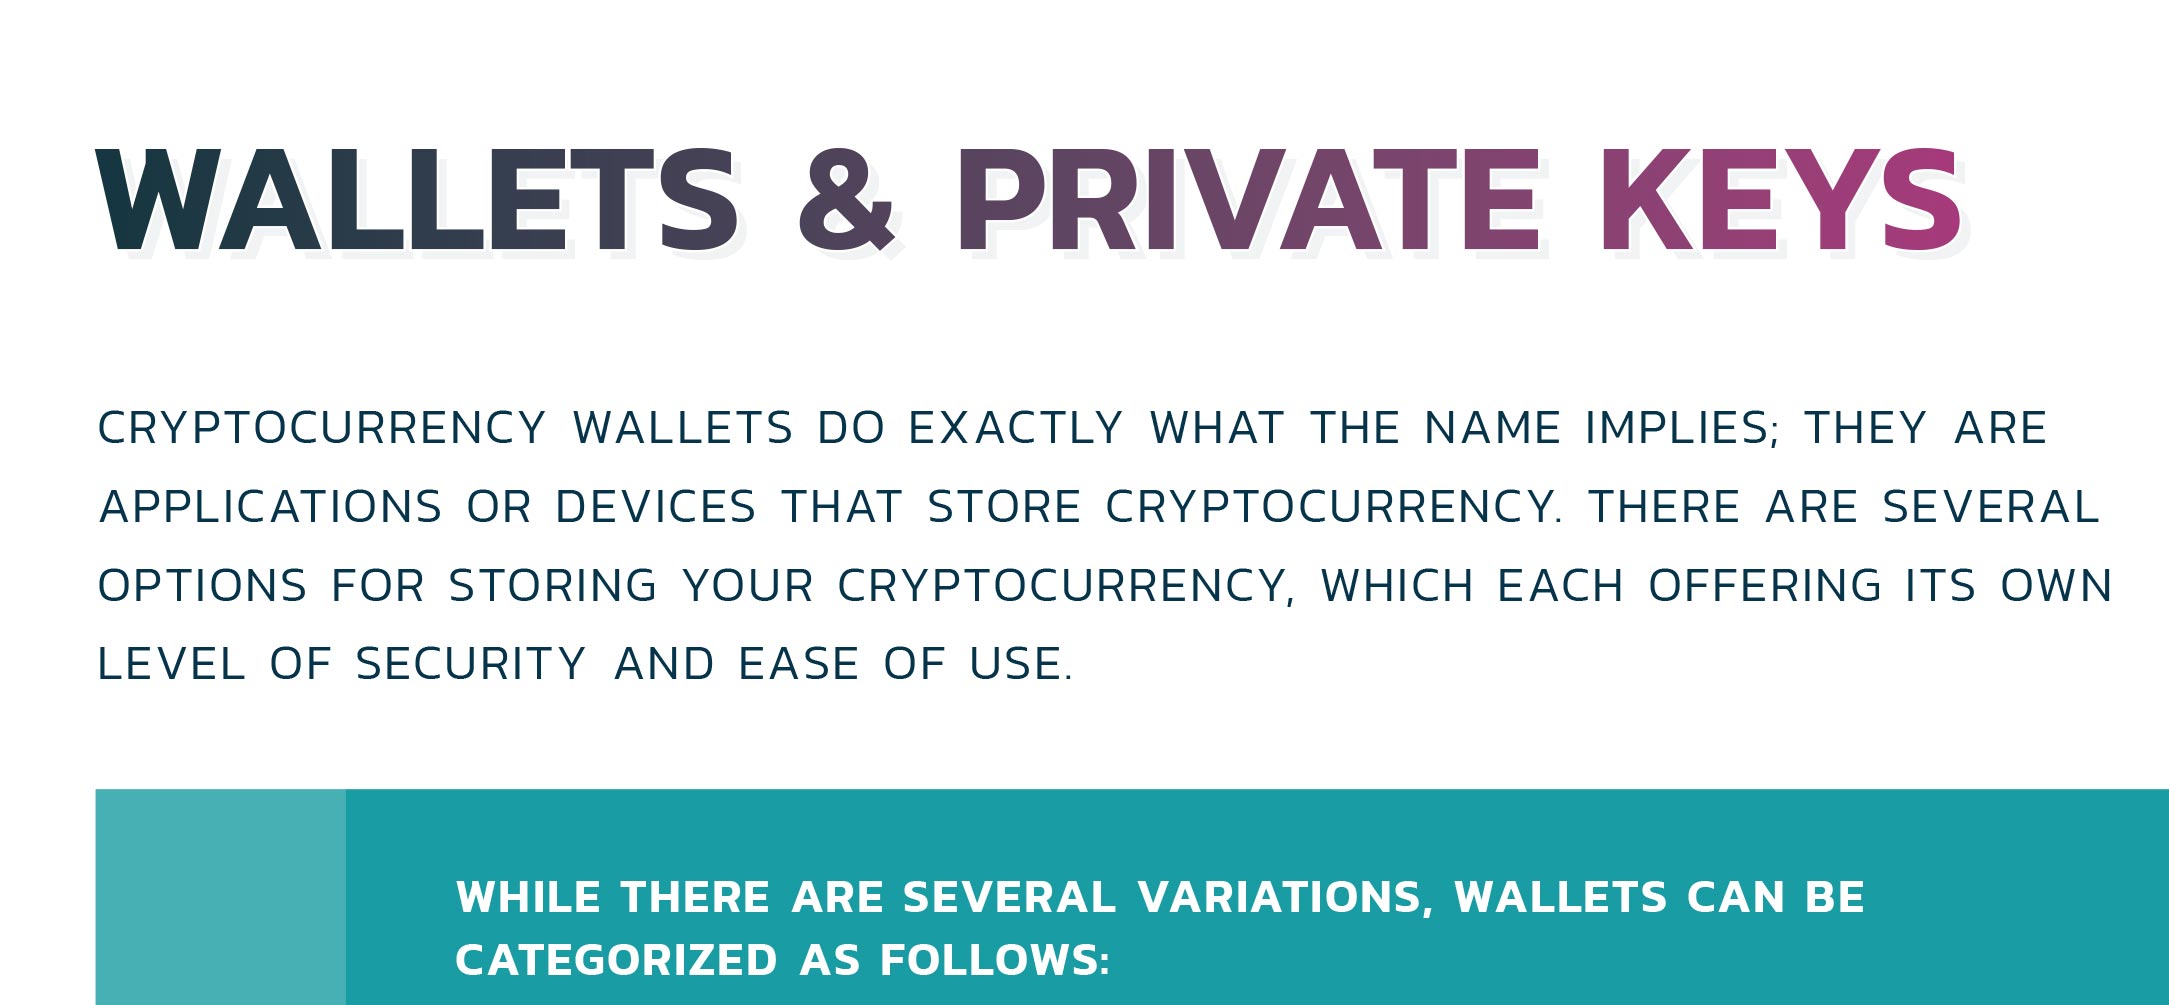 Wallets and Private Keys